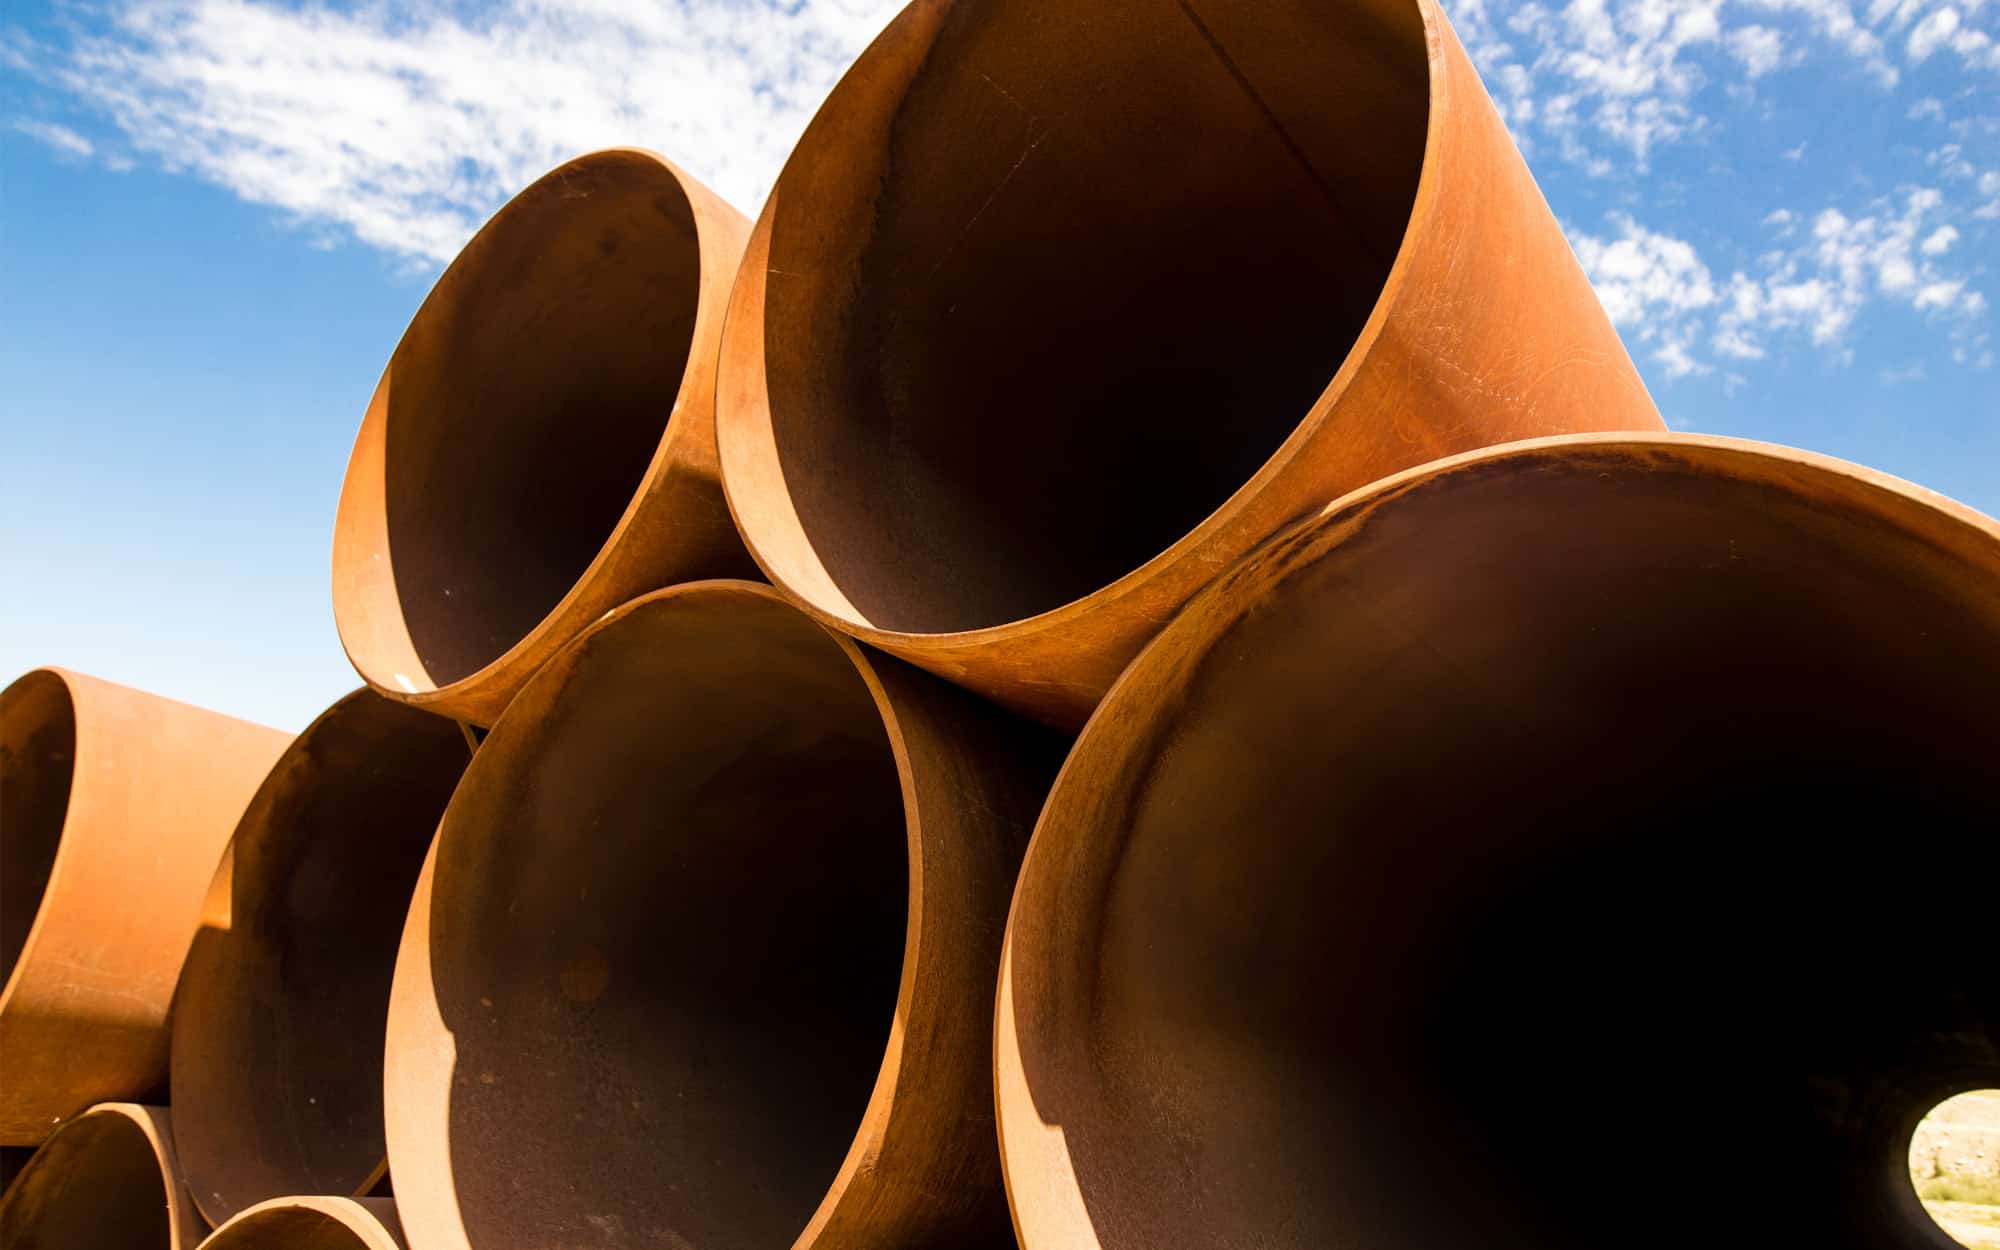 large rusty metal pipes as a background